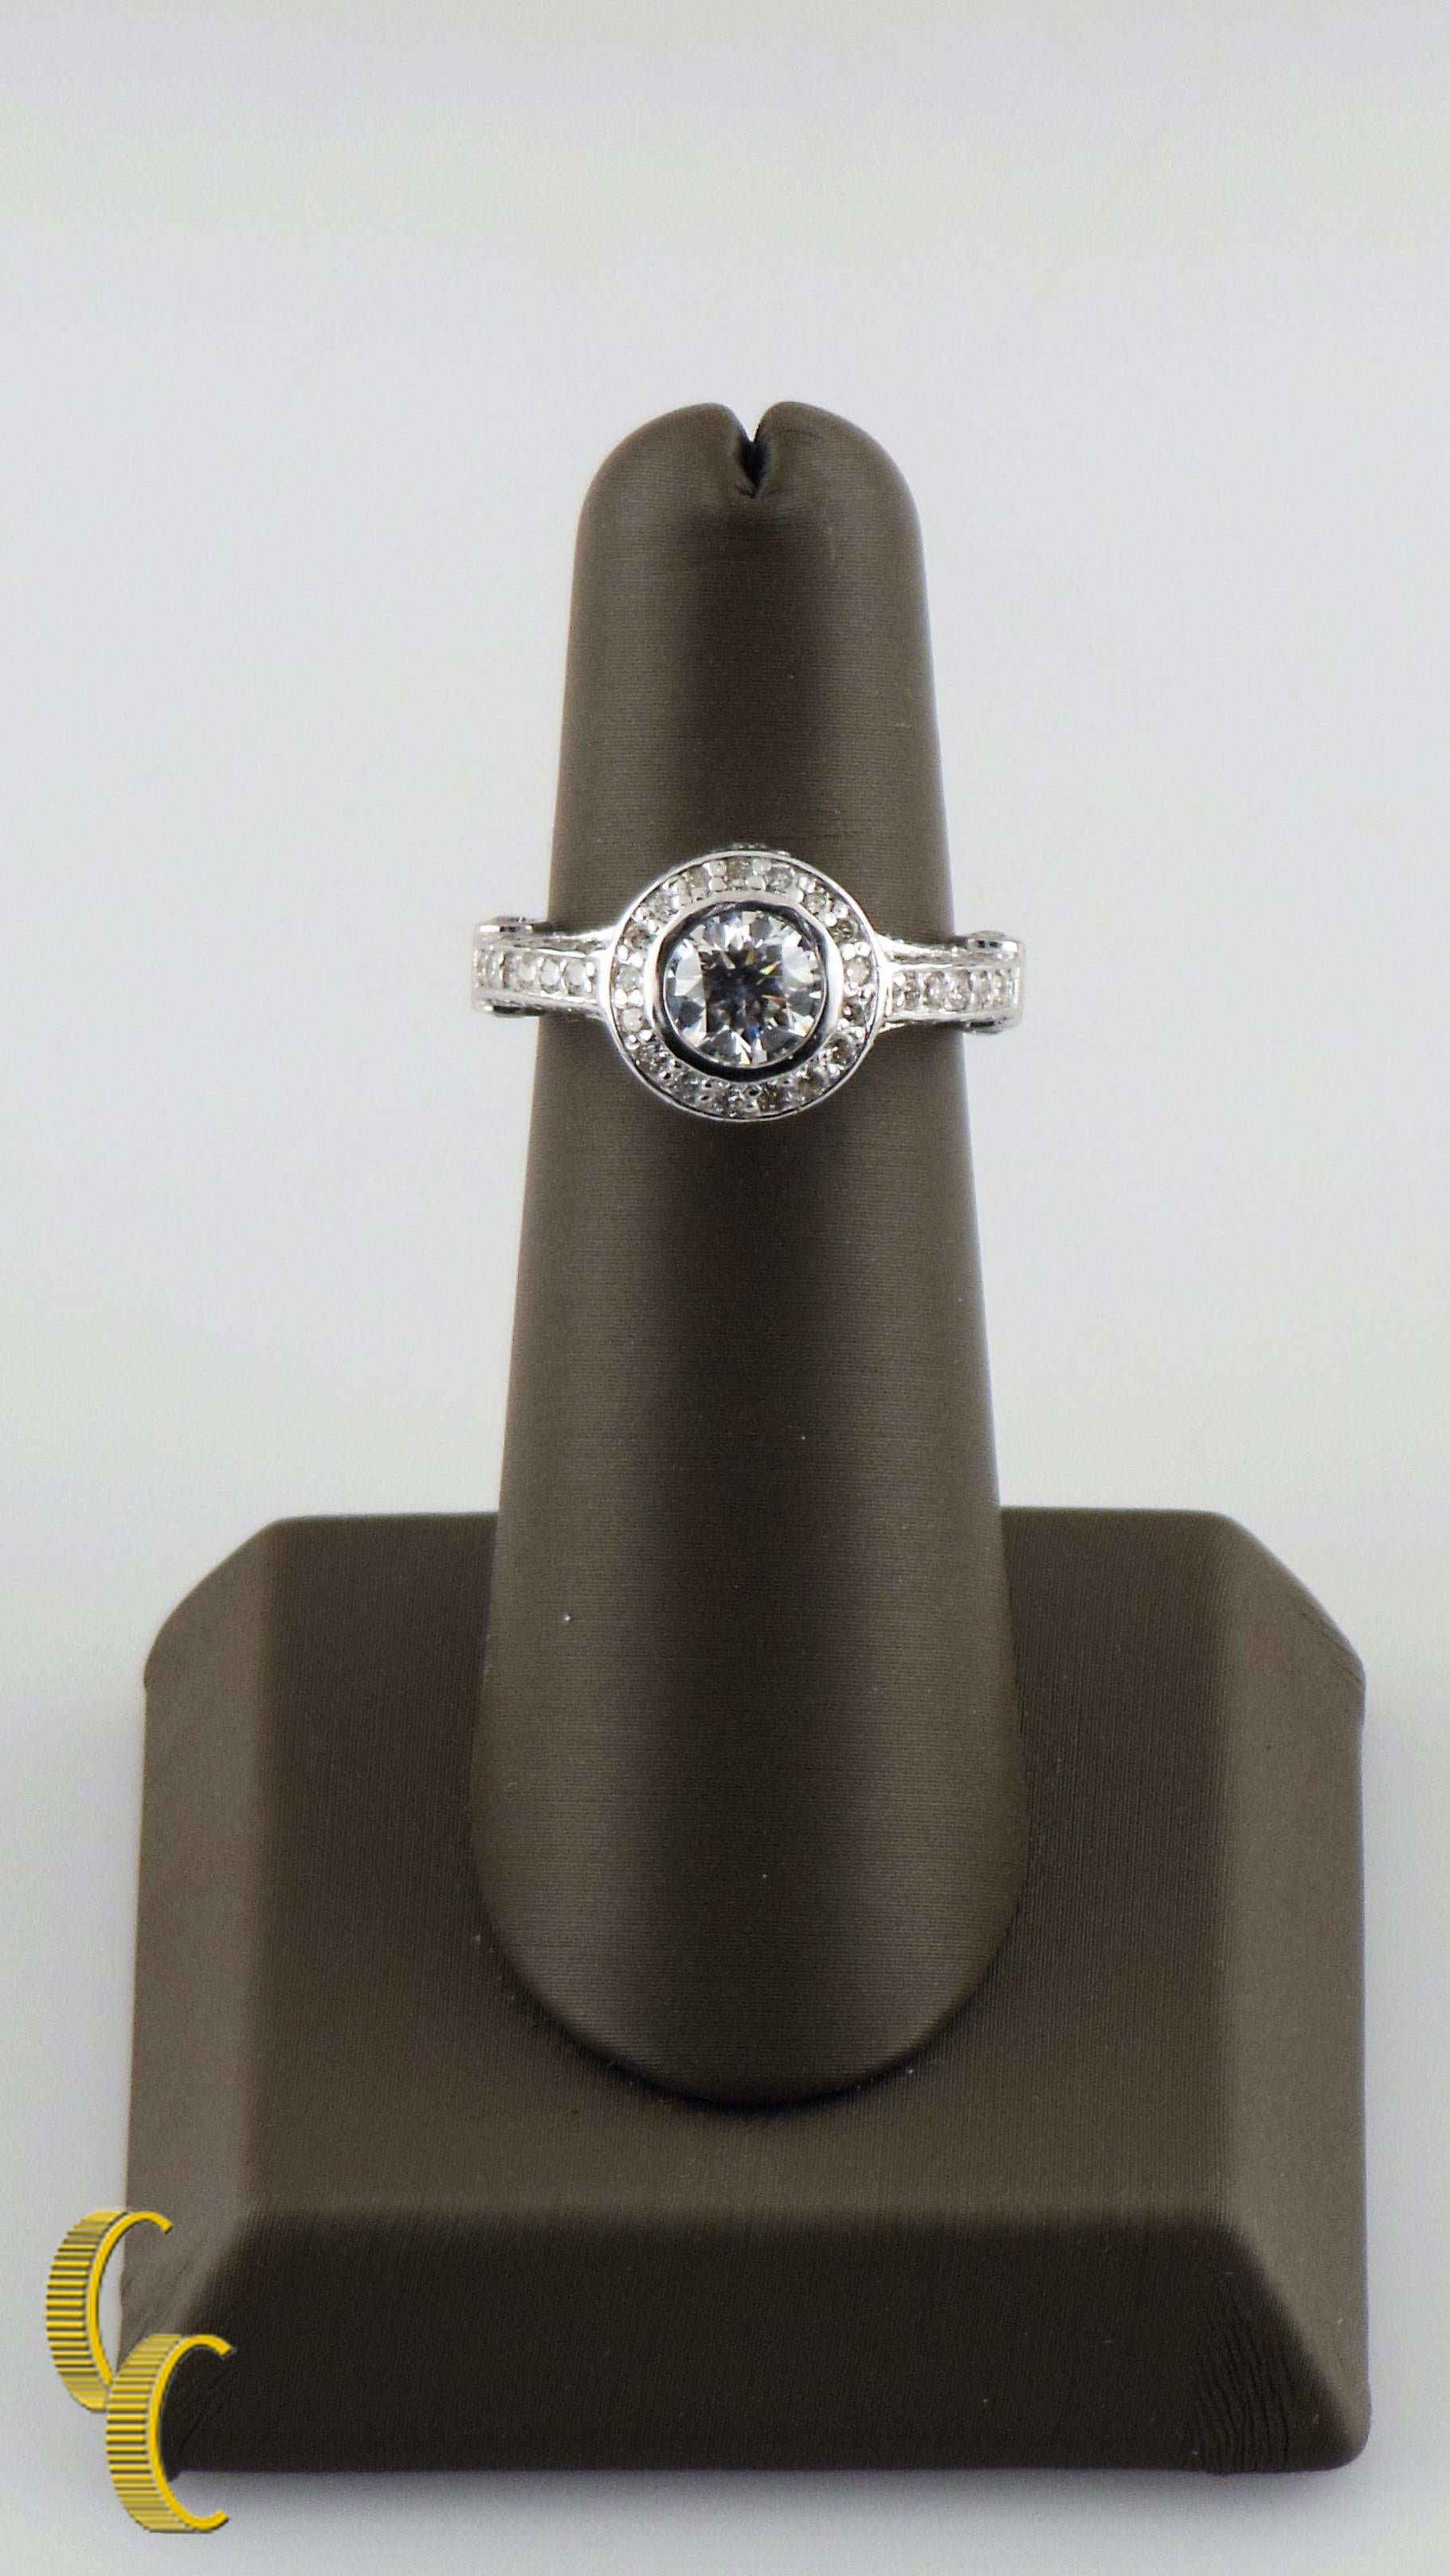 Features Round Brilliant Center Stone w/ Elaborate Gallery Crusted w/ Pave-Set Round Brilliant Accent Stones
Round Brilliant Center Diamond
Approximately= 1.00 carats
Clarity Approximately= SI-1
Color Approximately= I
Round Brilliant Accents